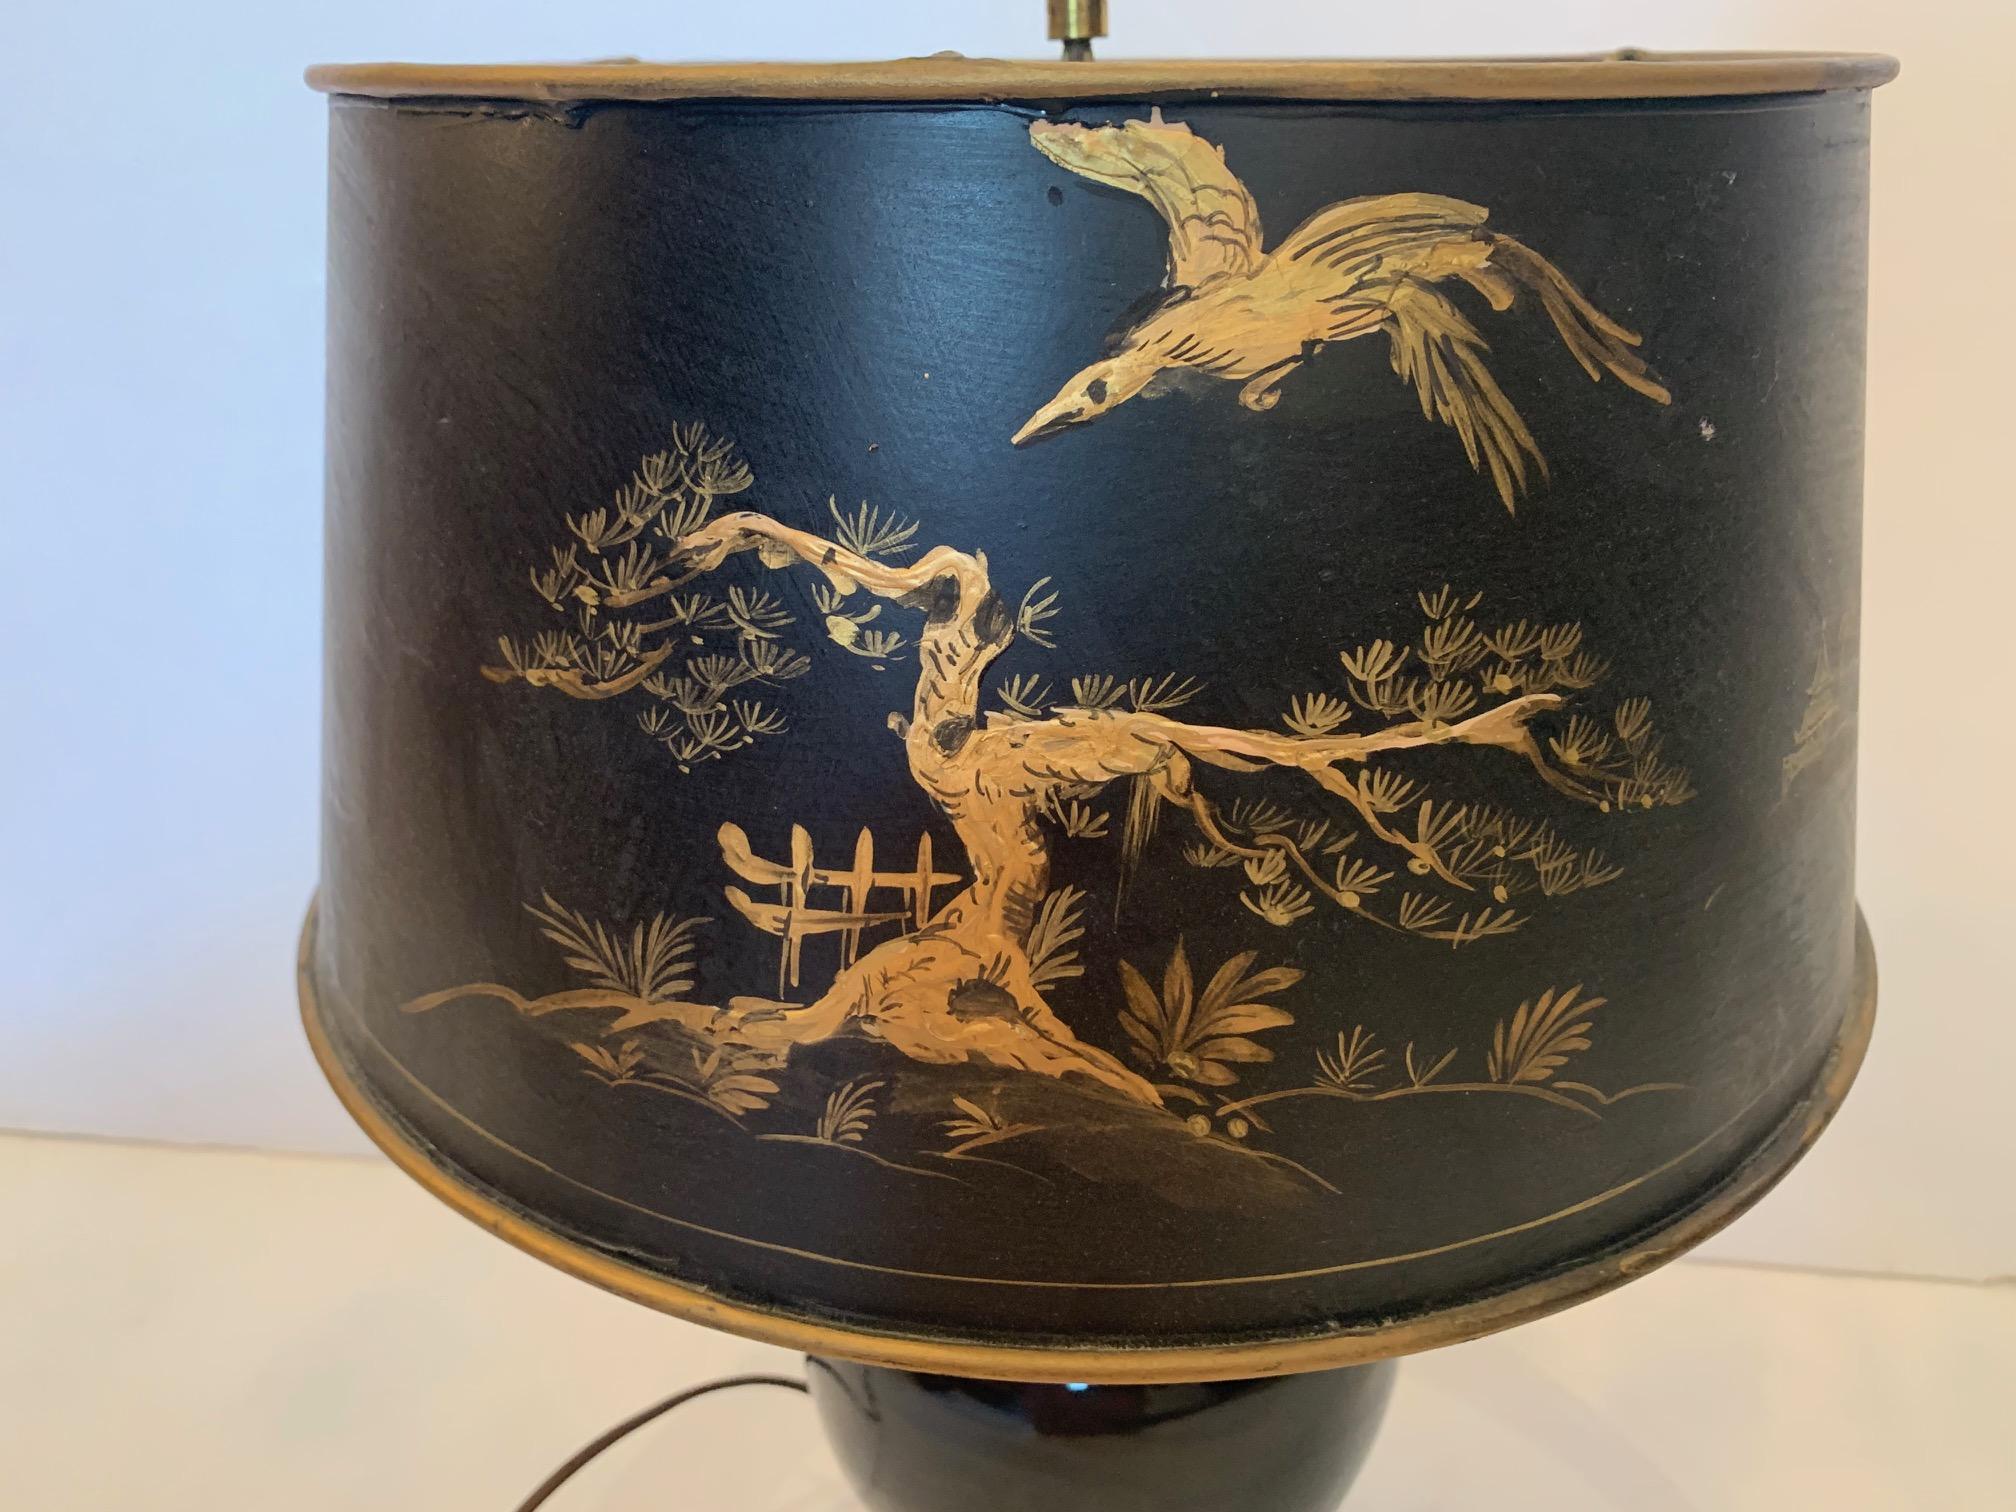 Great looking glossy black ginger jar ceramic lamp on carved rosewood base having handsome black and gold paper chinoiserie decorated shade.
Lamp itself 6